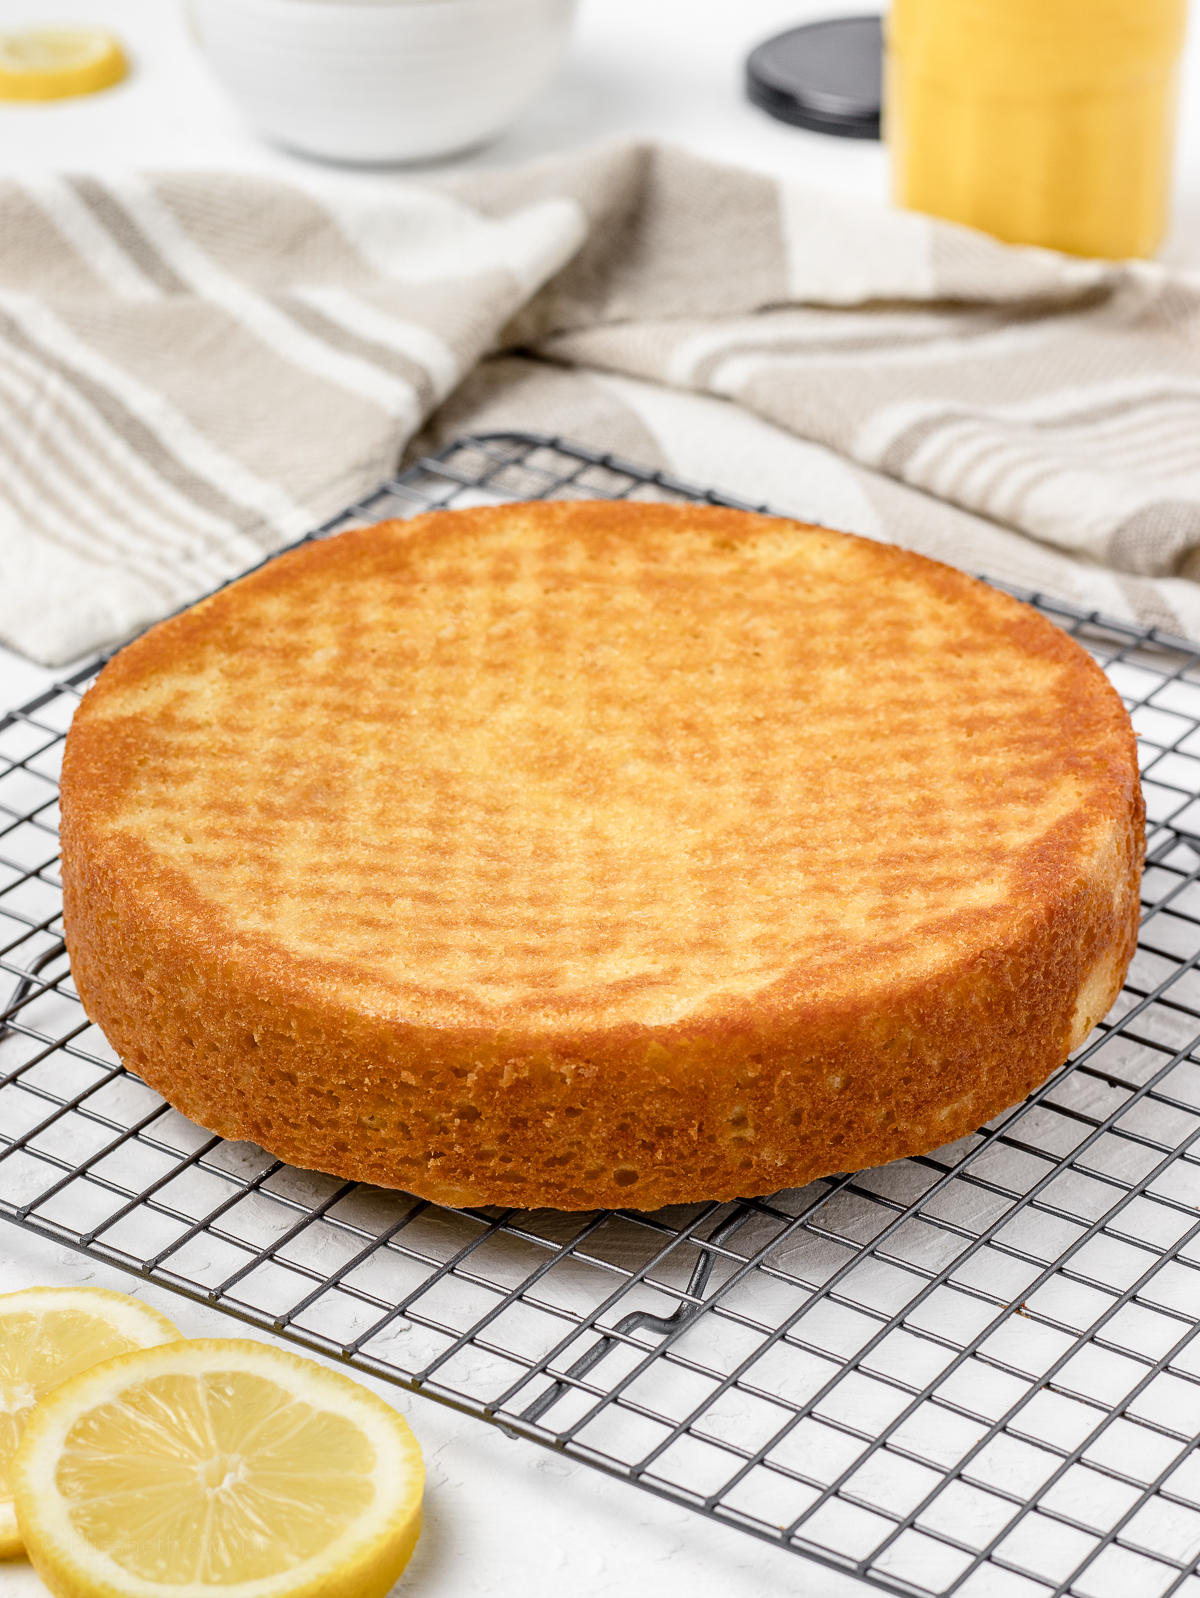 Baked lemon cake cooling on a wire rack.